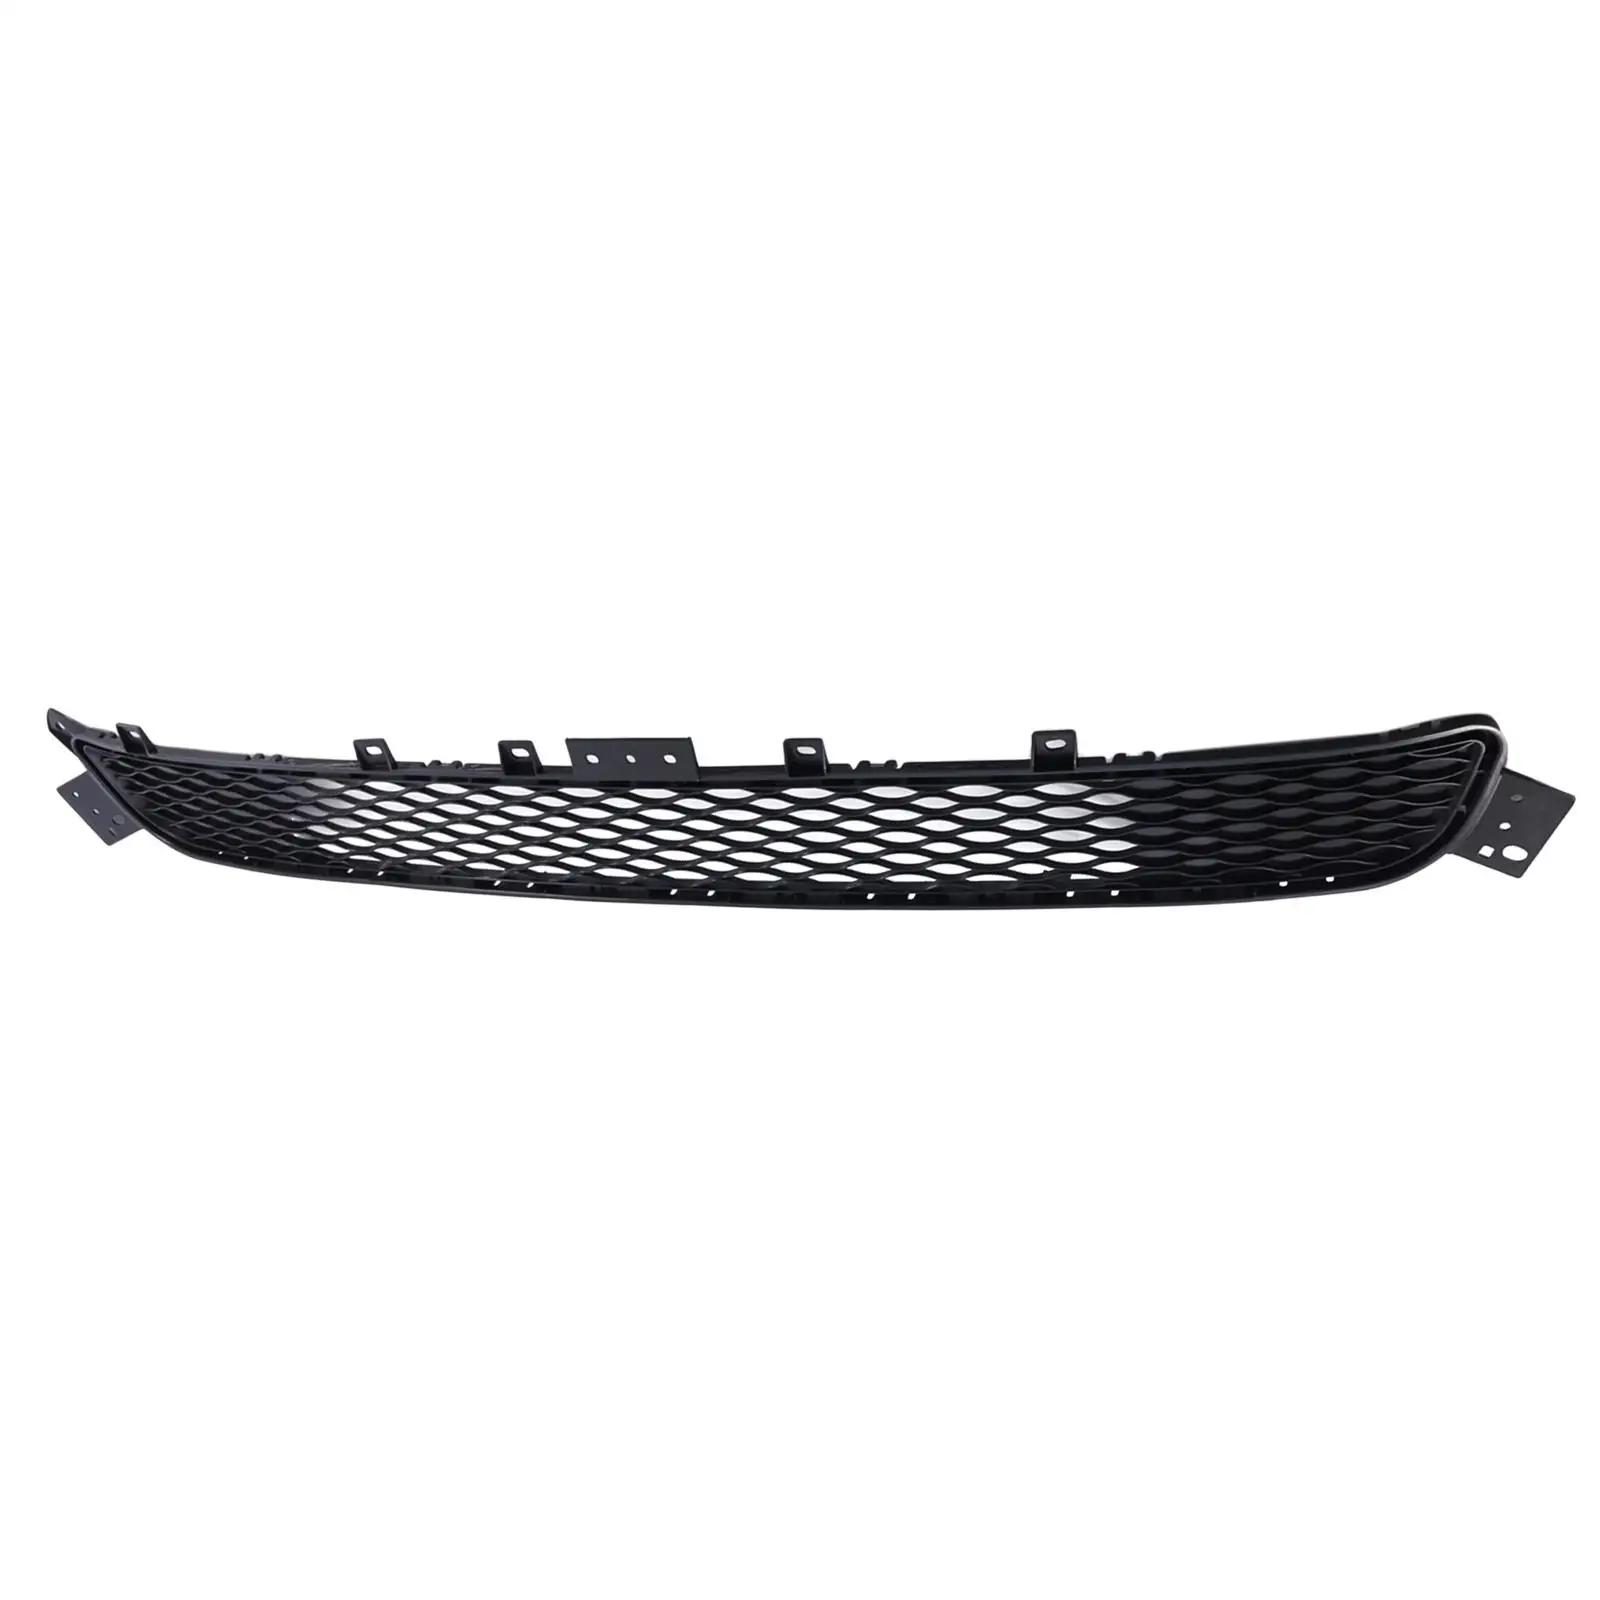 Front Bumper Lower Mesh Grille Guard for Q50 2014-17 Upgrade Replacement